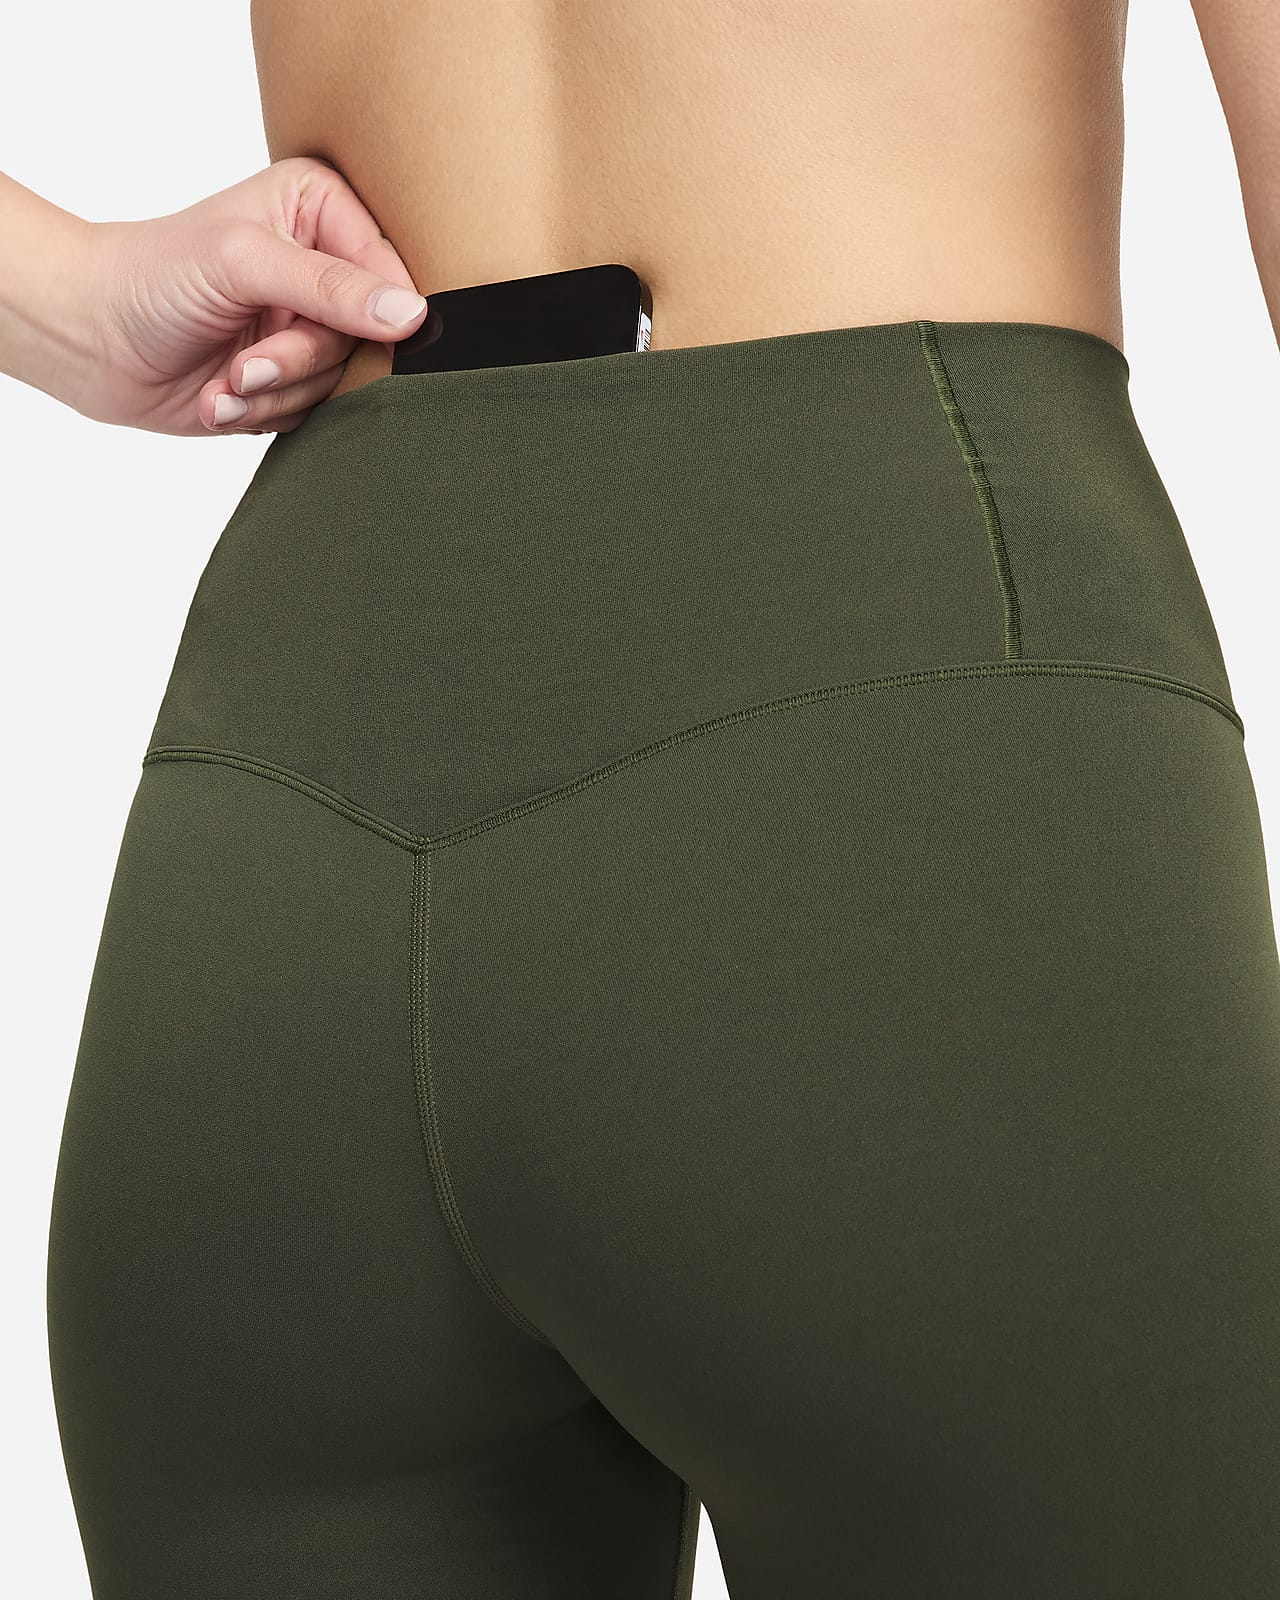 Wholesale Premium Soft Summer Gym Clothes 13cm High Waisted Biker Shorts  for Women, Customize Compression Short Yoga Pants with Side Pockets - China  Green Biker Shorts and Biker Shorts Outfit for Women